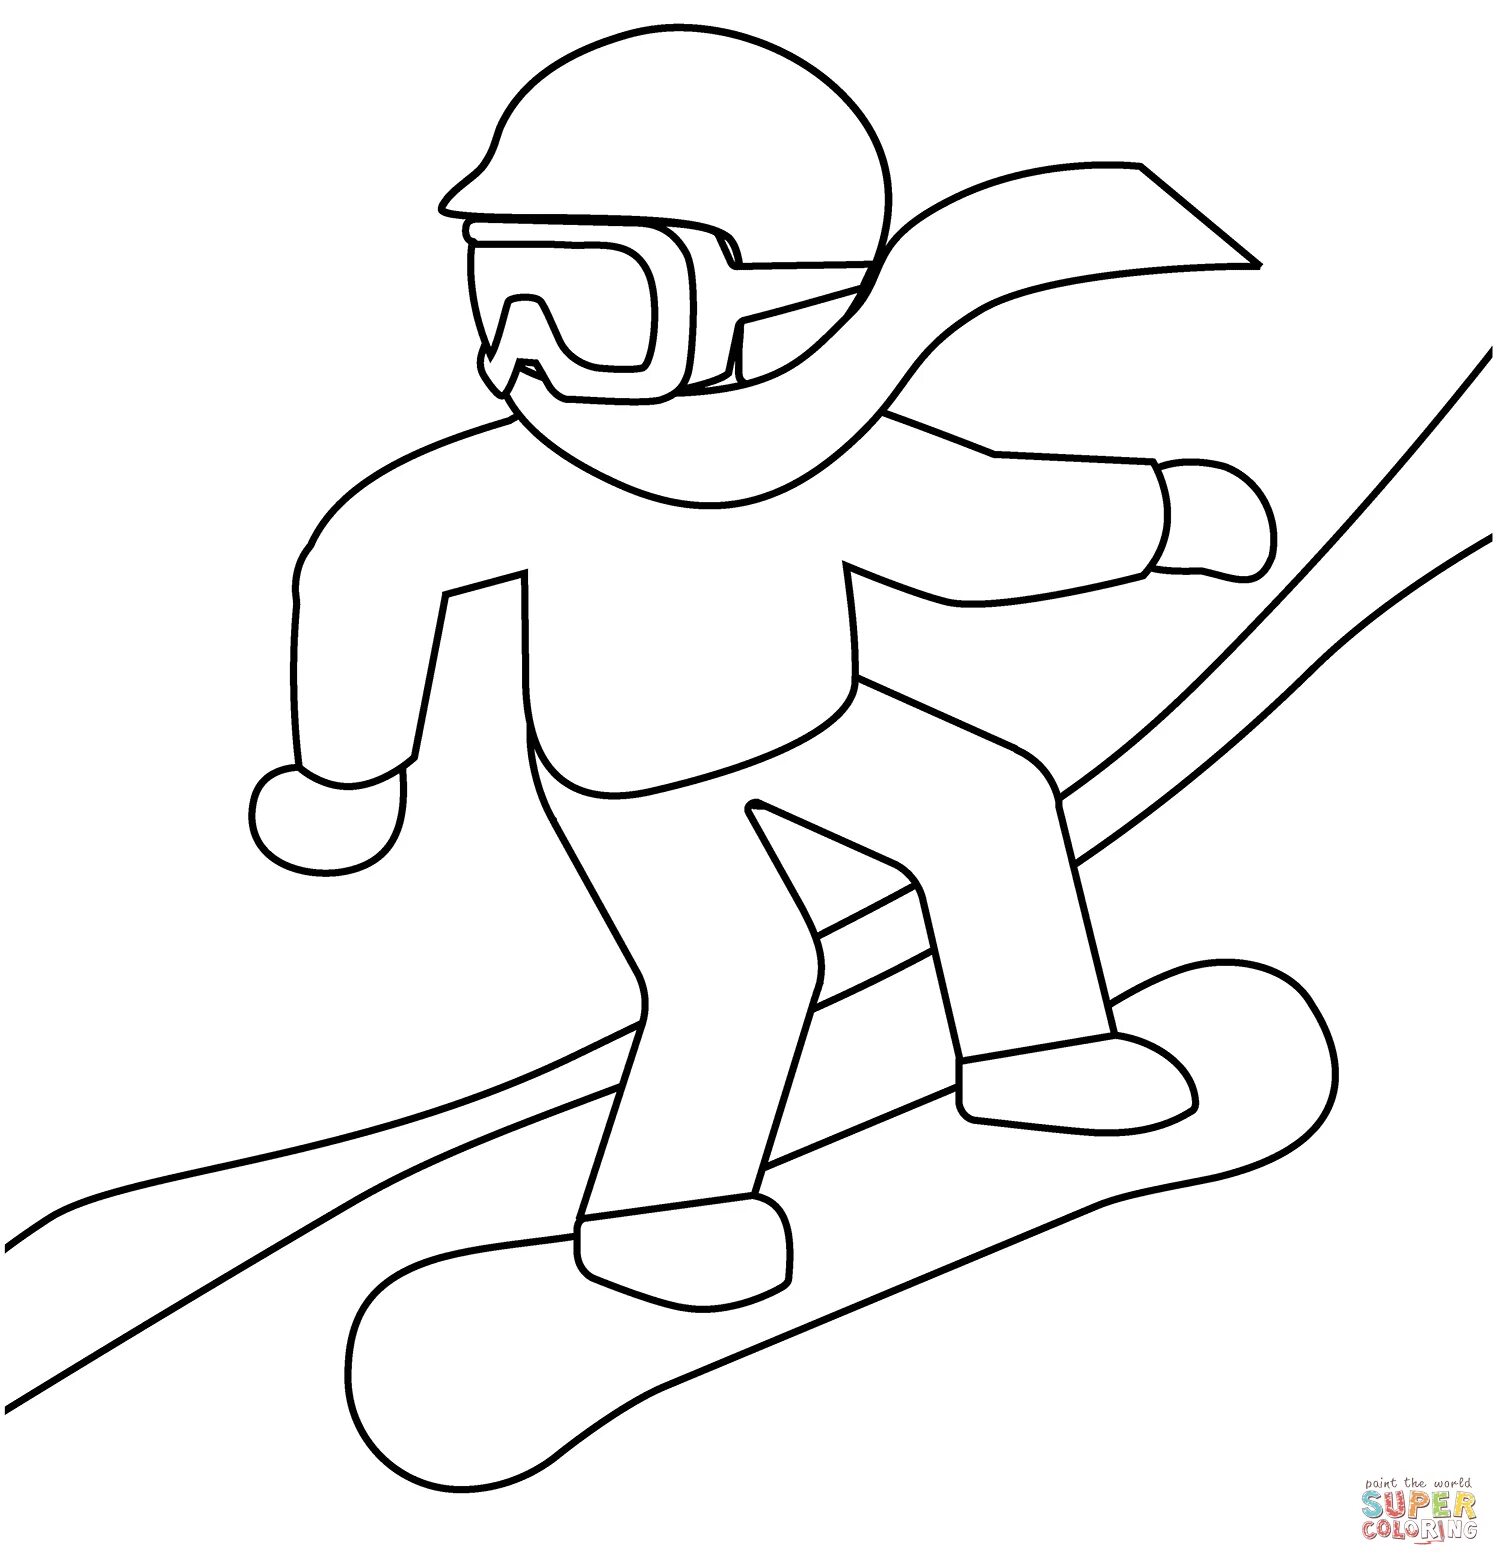 Snowboarder glitter coloring book for kids